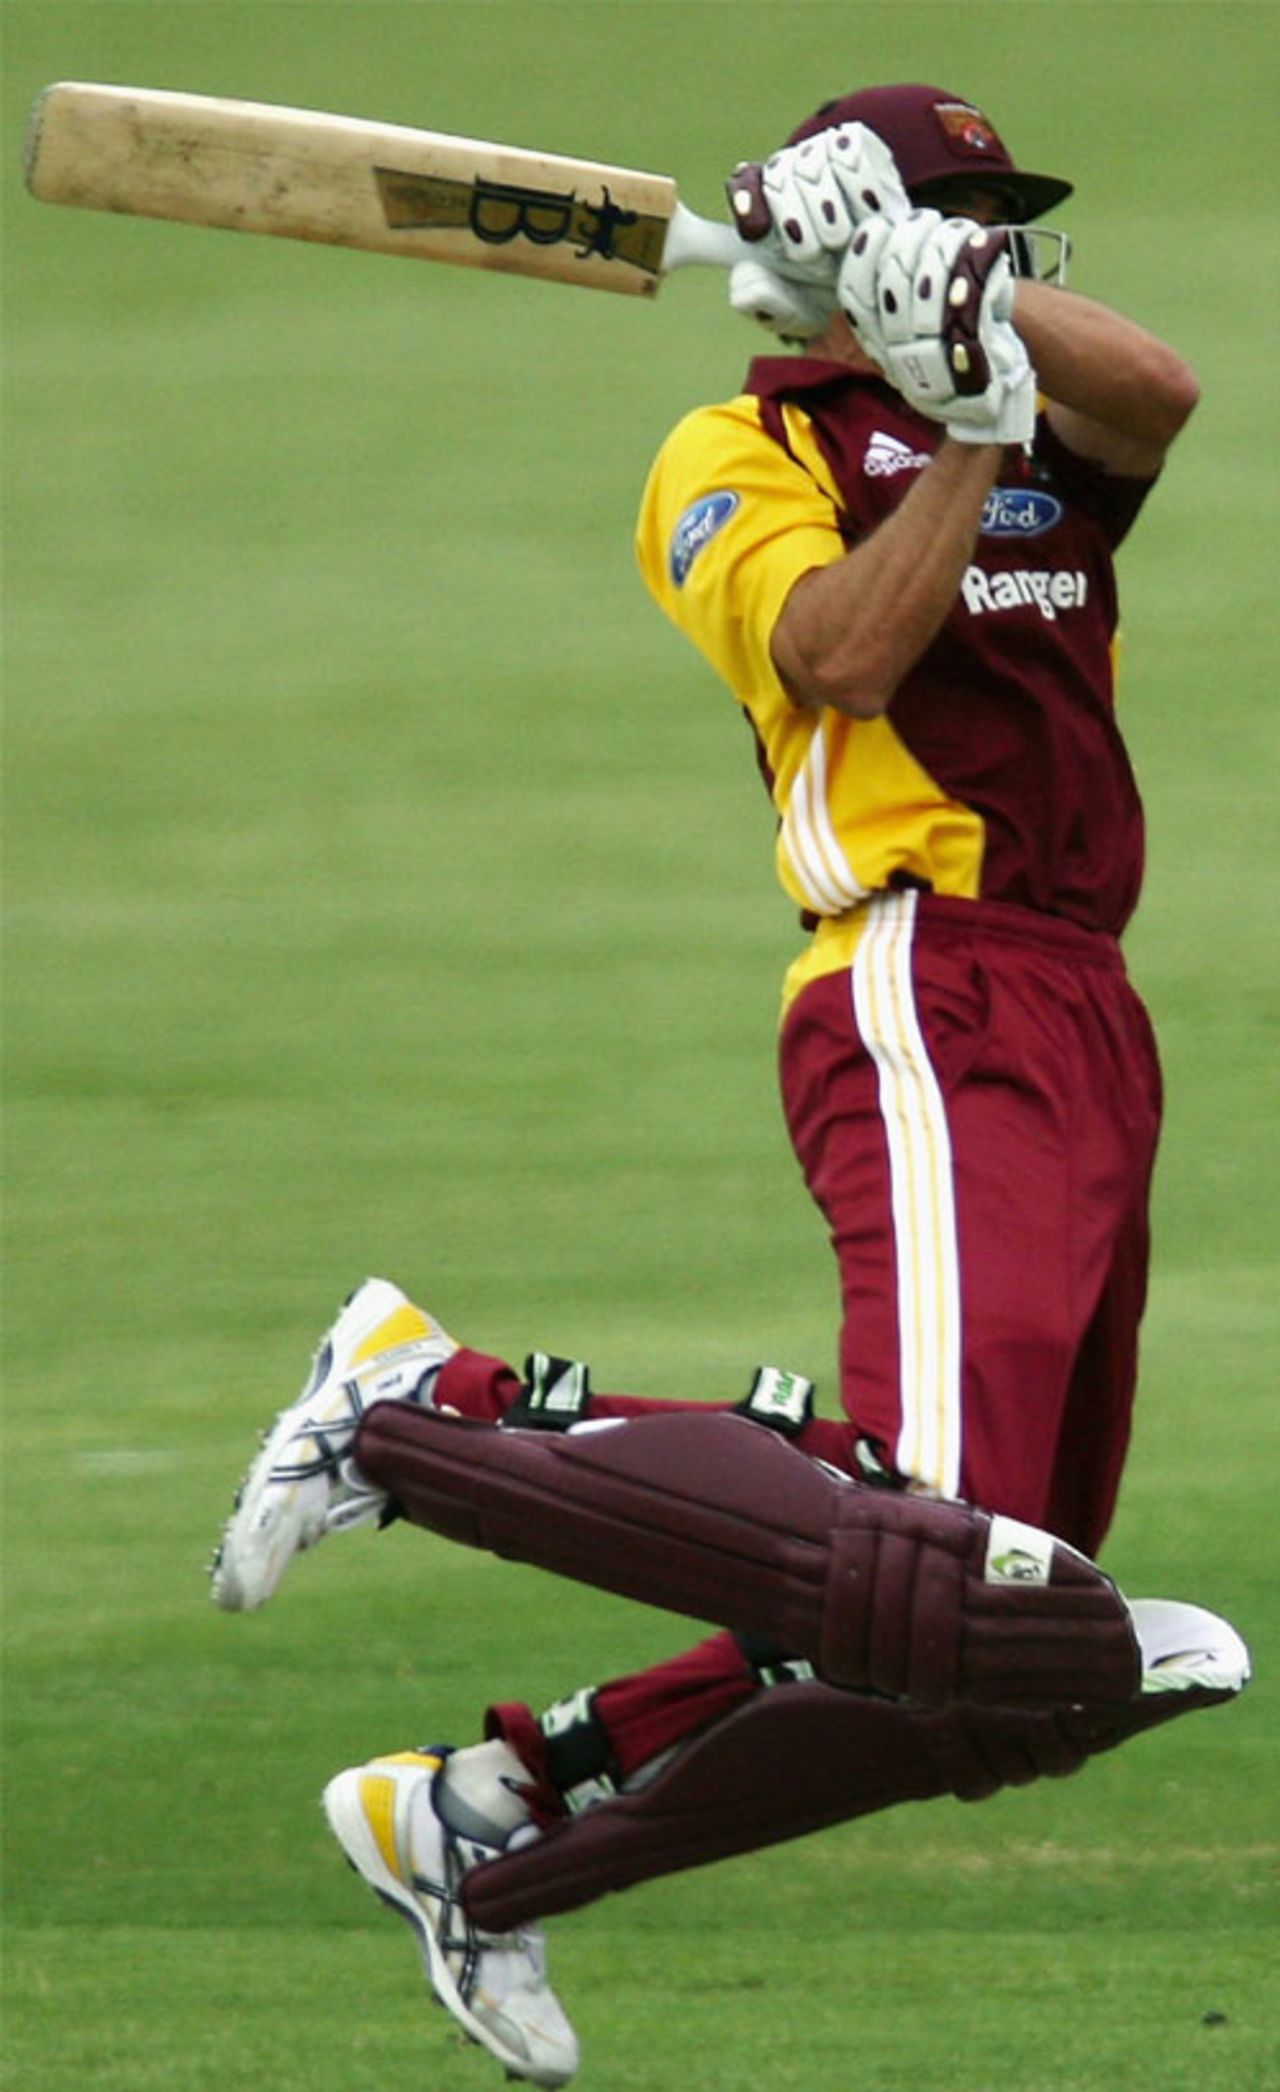 Lee Carseldine topscored with 45 as Queensland could only make 170, South Australia v Queensland, FR Cup, Adelaide, December 23, 2007